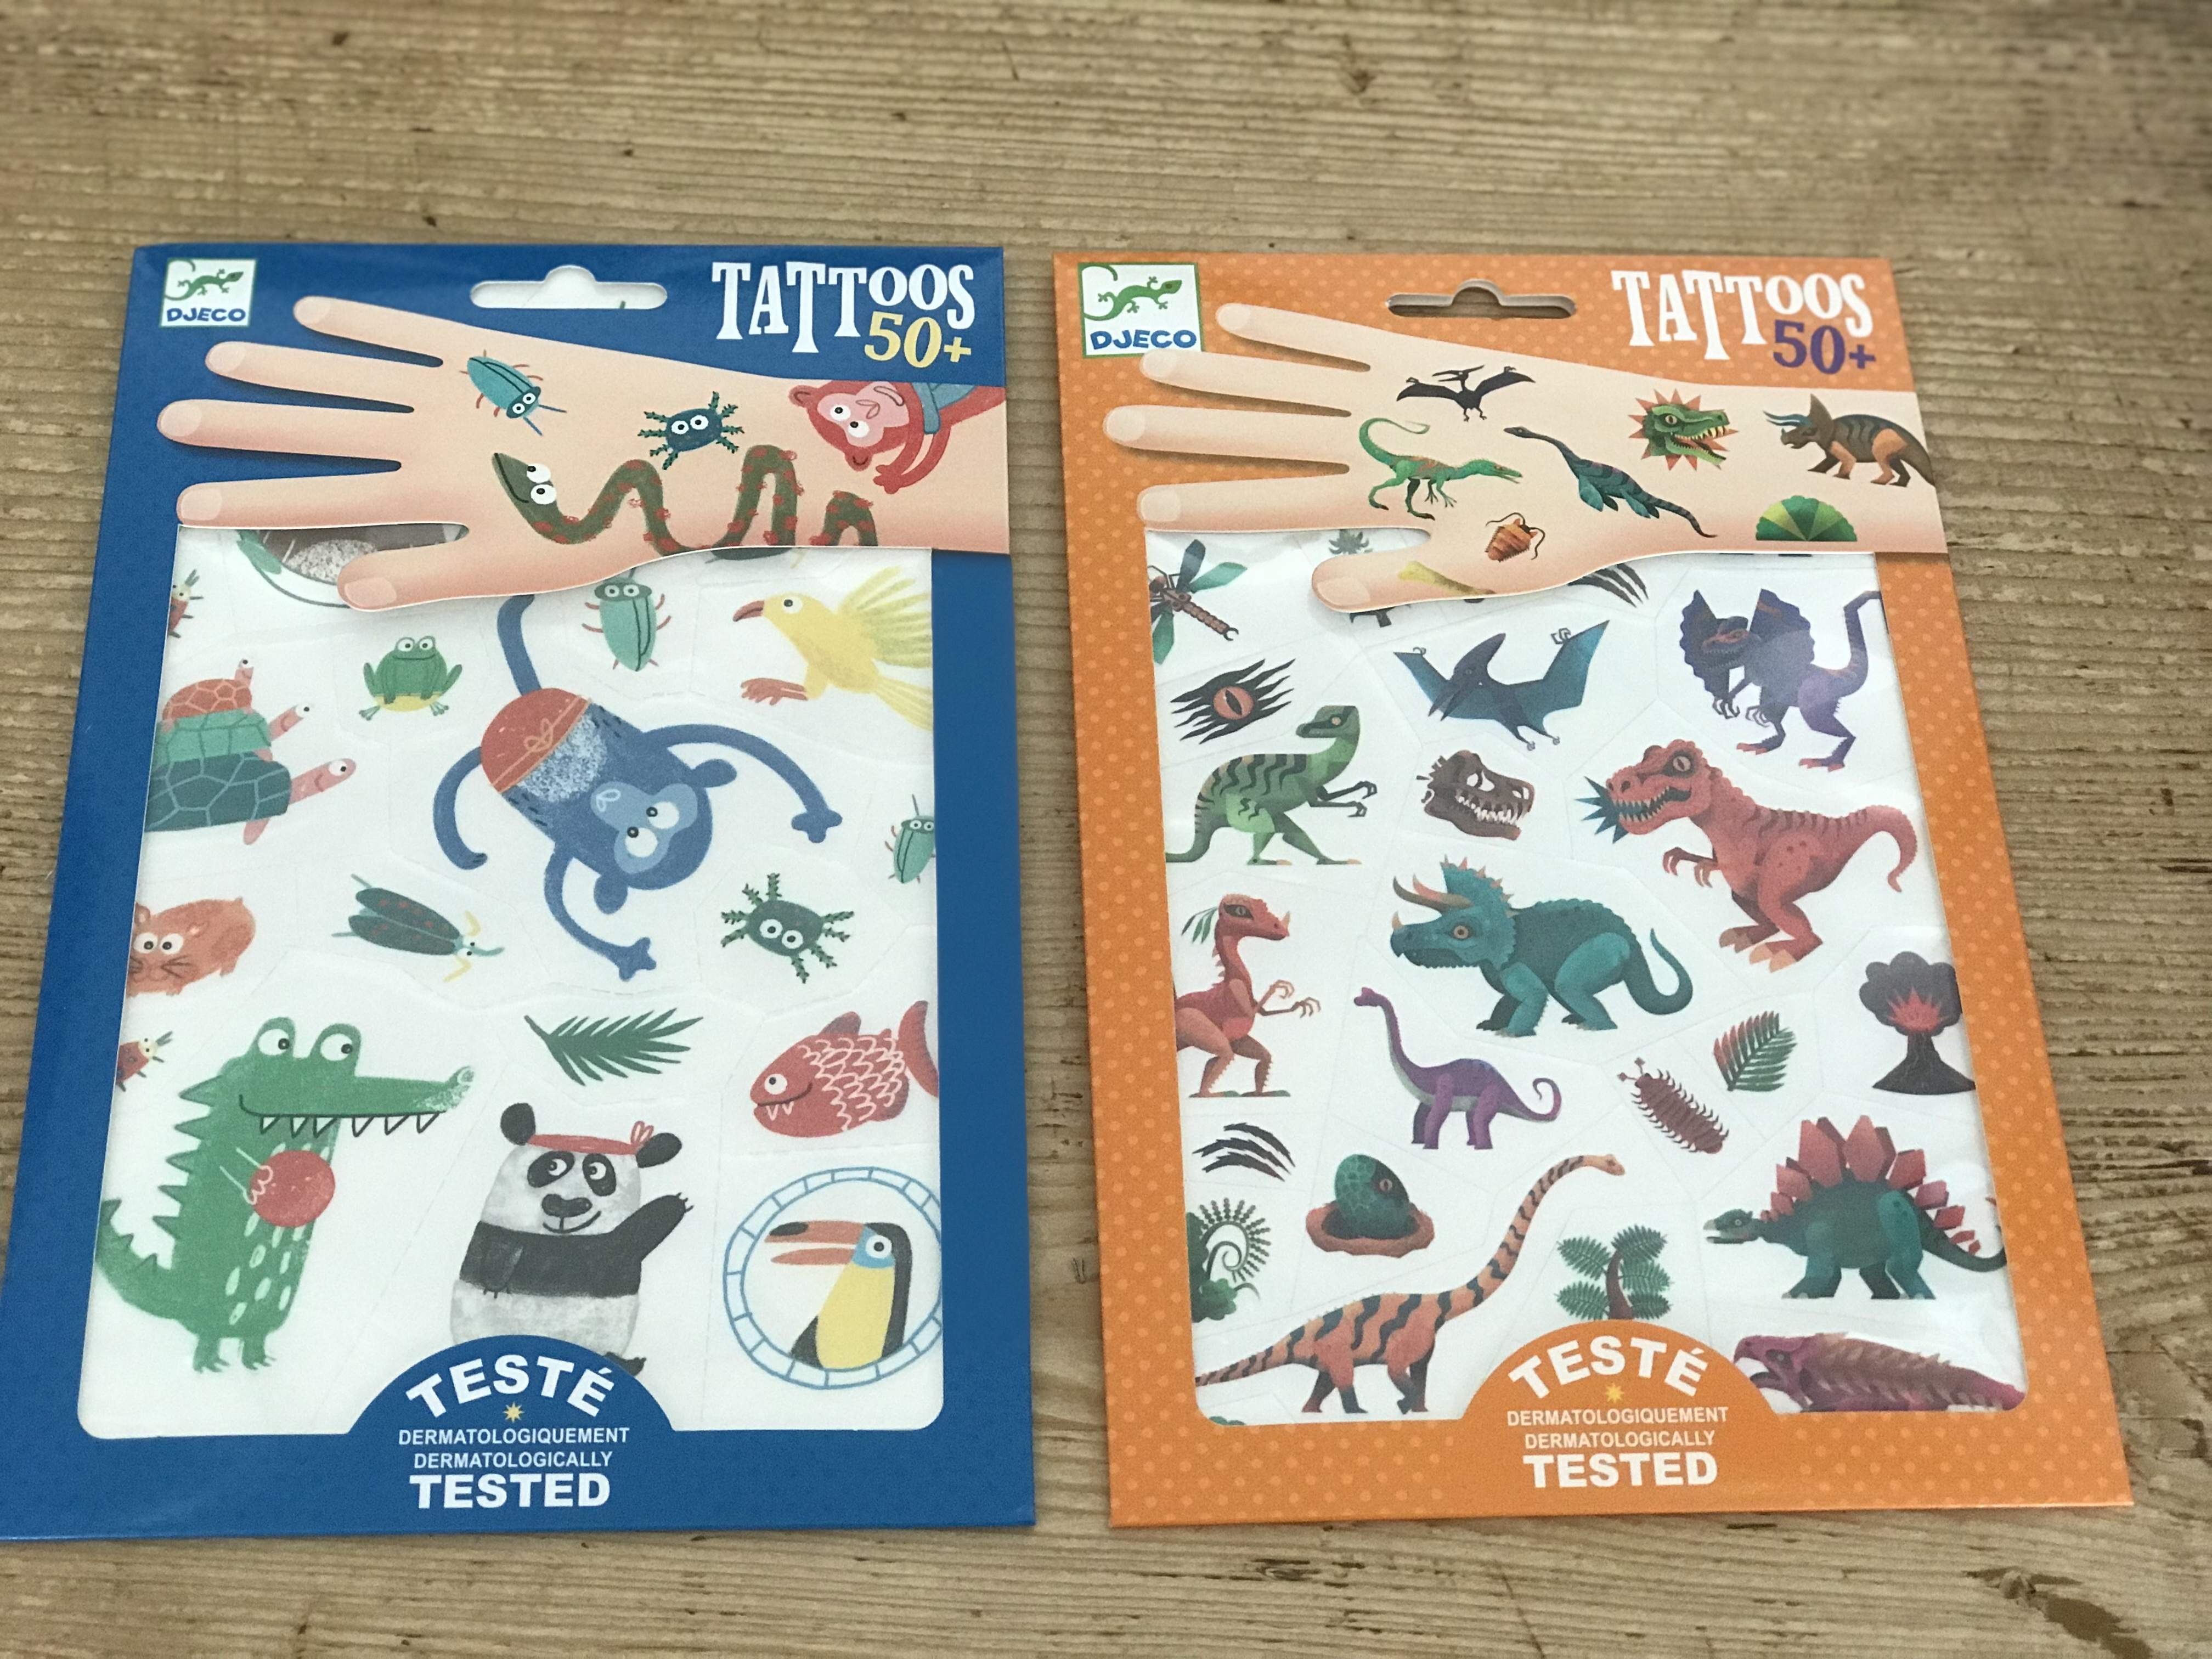 Stickers and Tattoos